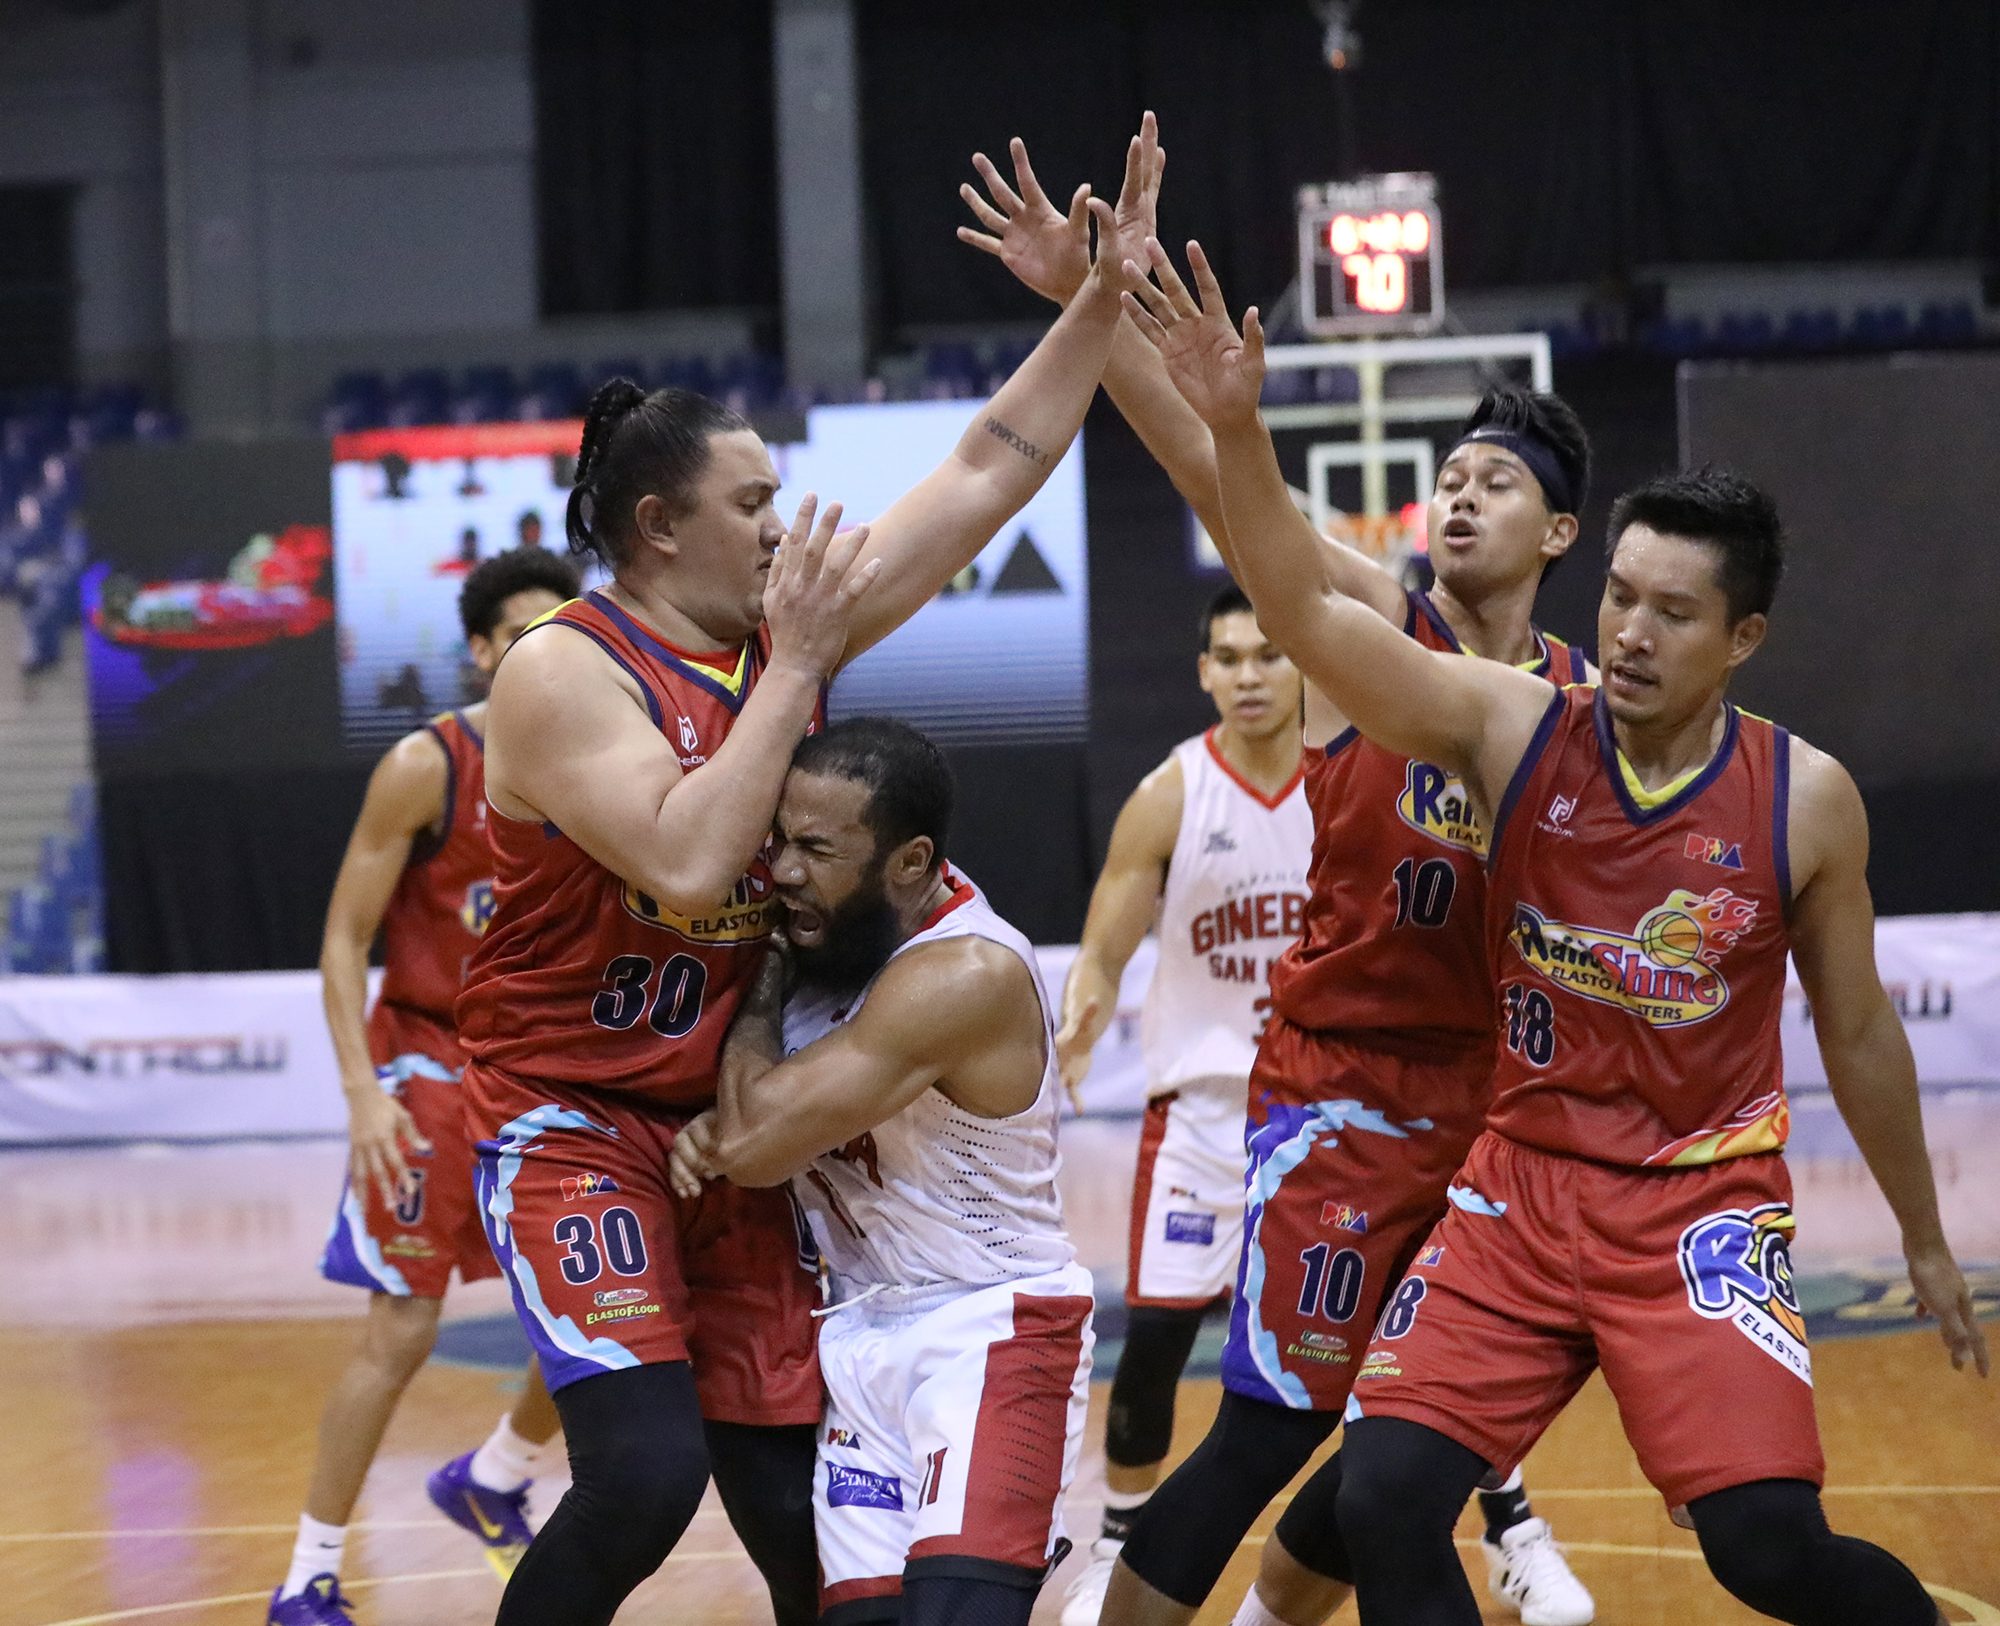 Ginebra star Scottie Thompson struggles in debut of new jersey number